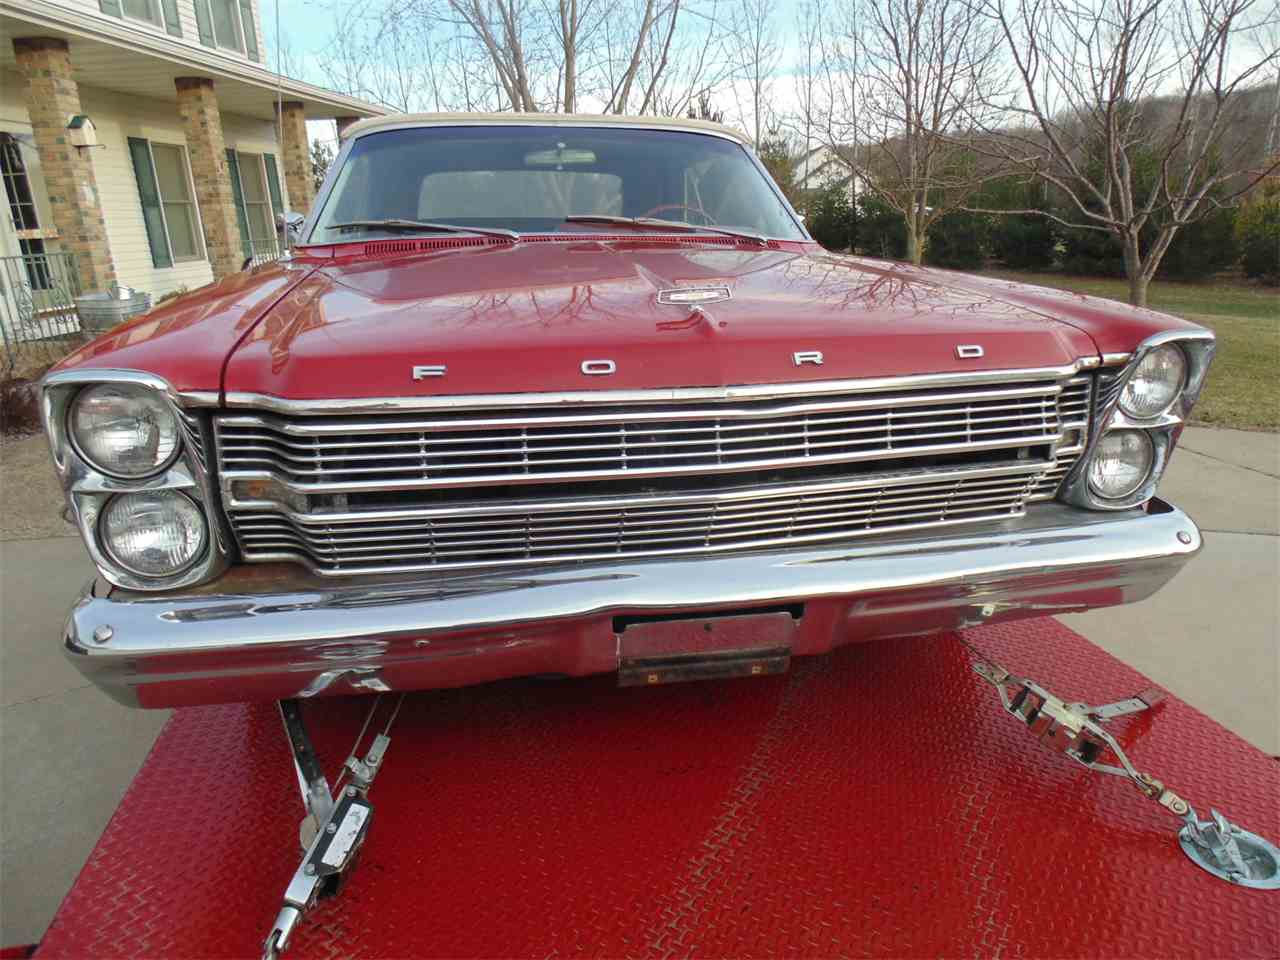 1966 Ford Galaxie 500 For Sale Classiccars Cc 971291 in Classic Cars Rochester Mn